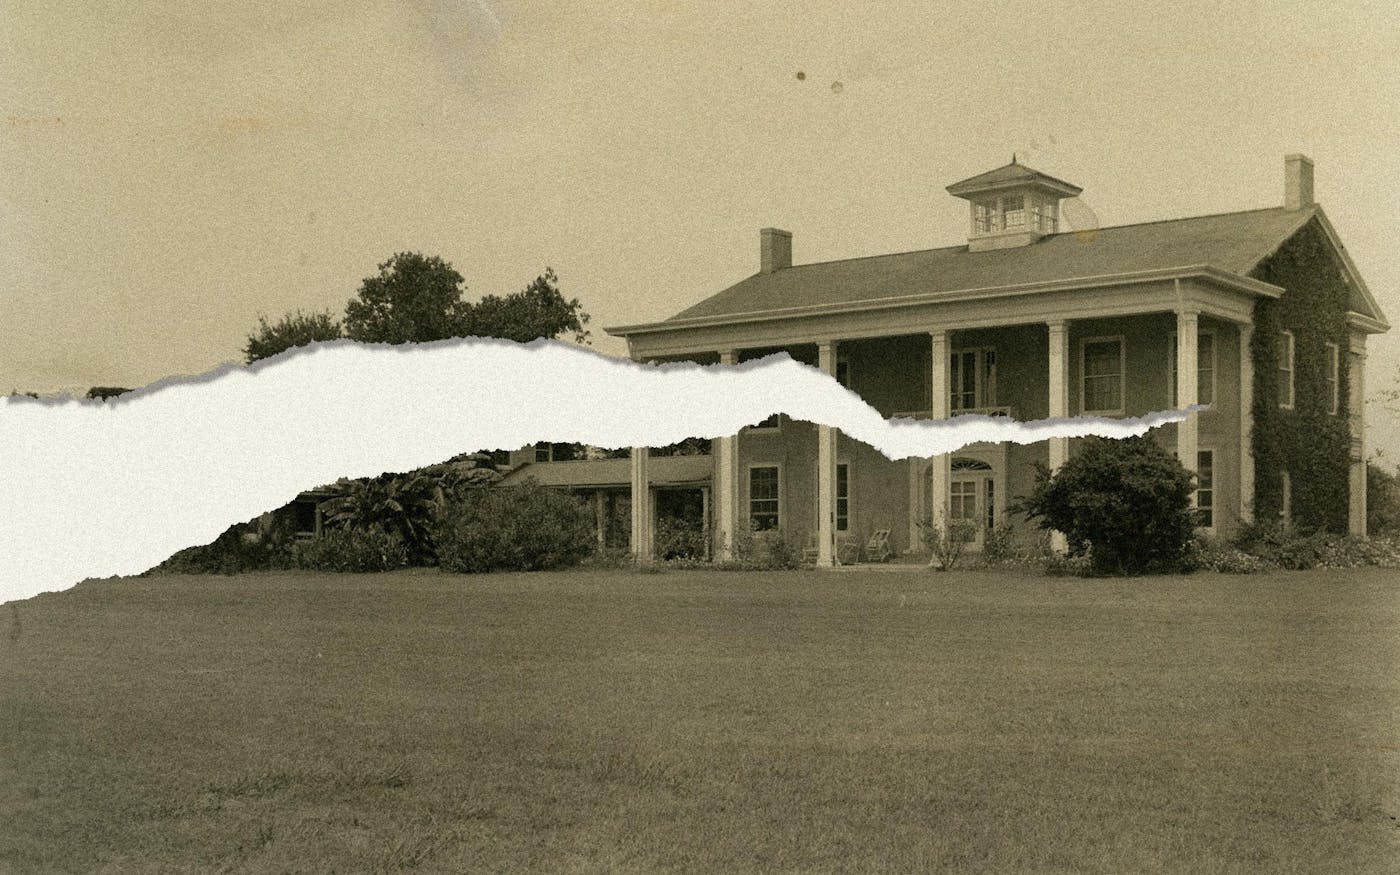 https://img.texasmonthly.com/2023/12/Texas-Historical-Commission-removing-books-Varner-Hogg-Plantation-Gift-Shop.jpg?auto=compress&crop=faces&fit=crop&fm=jpg&h=1050&ixlib=php-3.3.1&q=45&w=1400